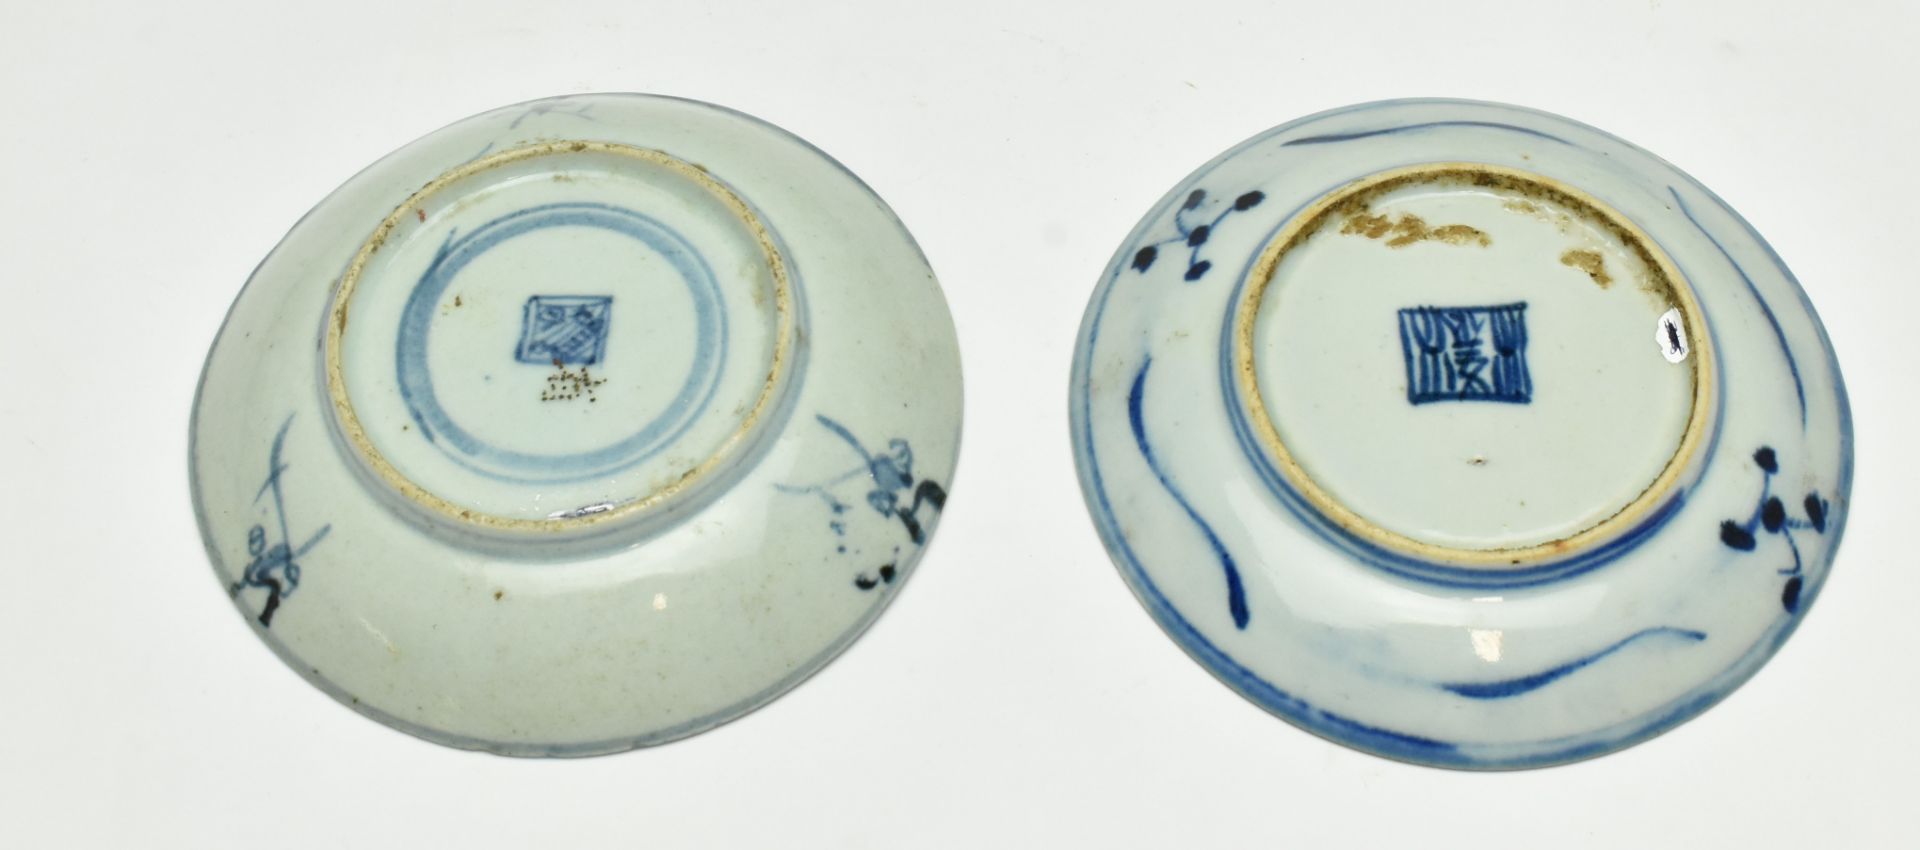 GROUP OF SIX BLUE AND WHITE EXPORT PLATES, QING DYNASTY - Image 3 of 7